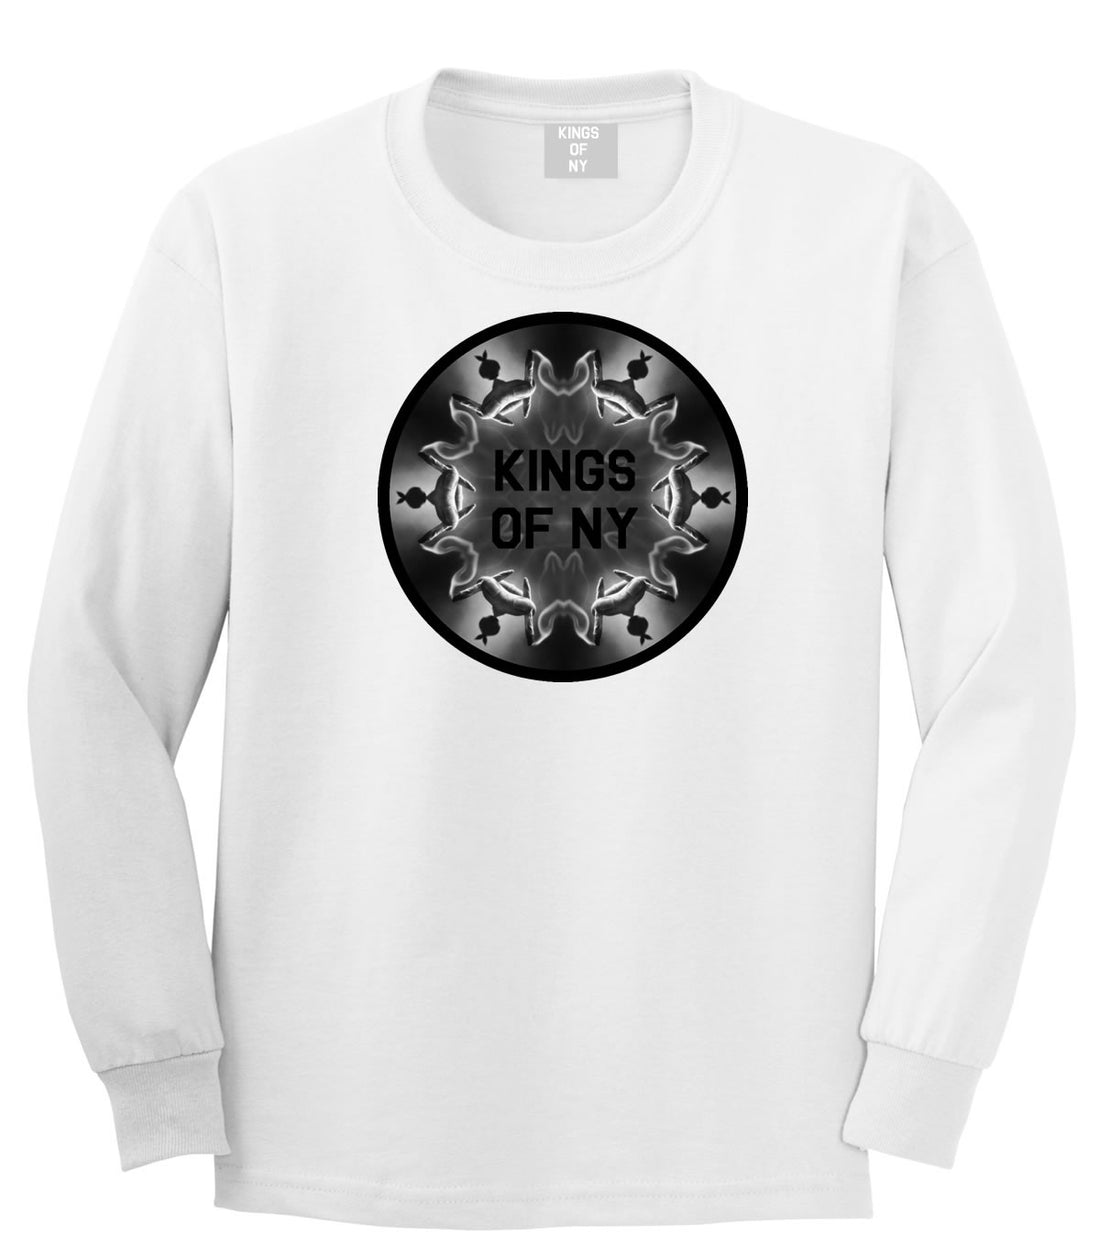 Pass That Blunt Long Sleeve T-Shirt in White By Kings Of NY